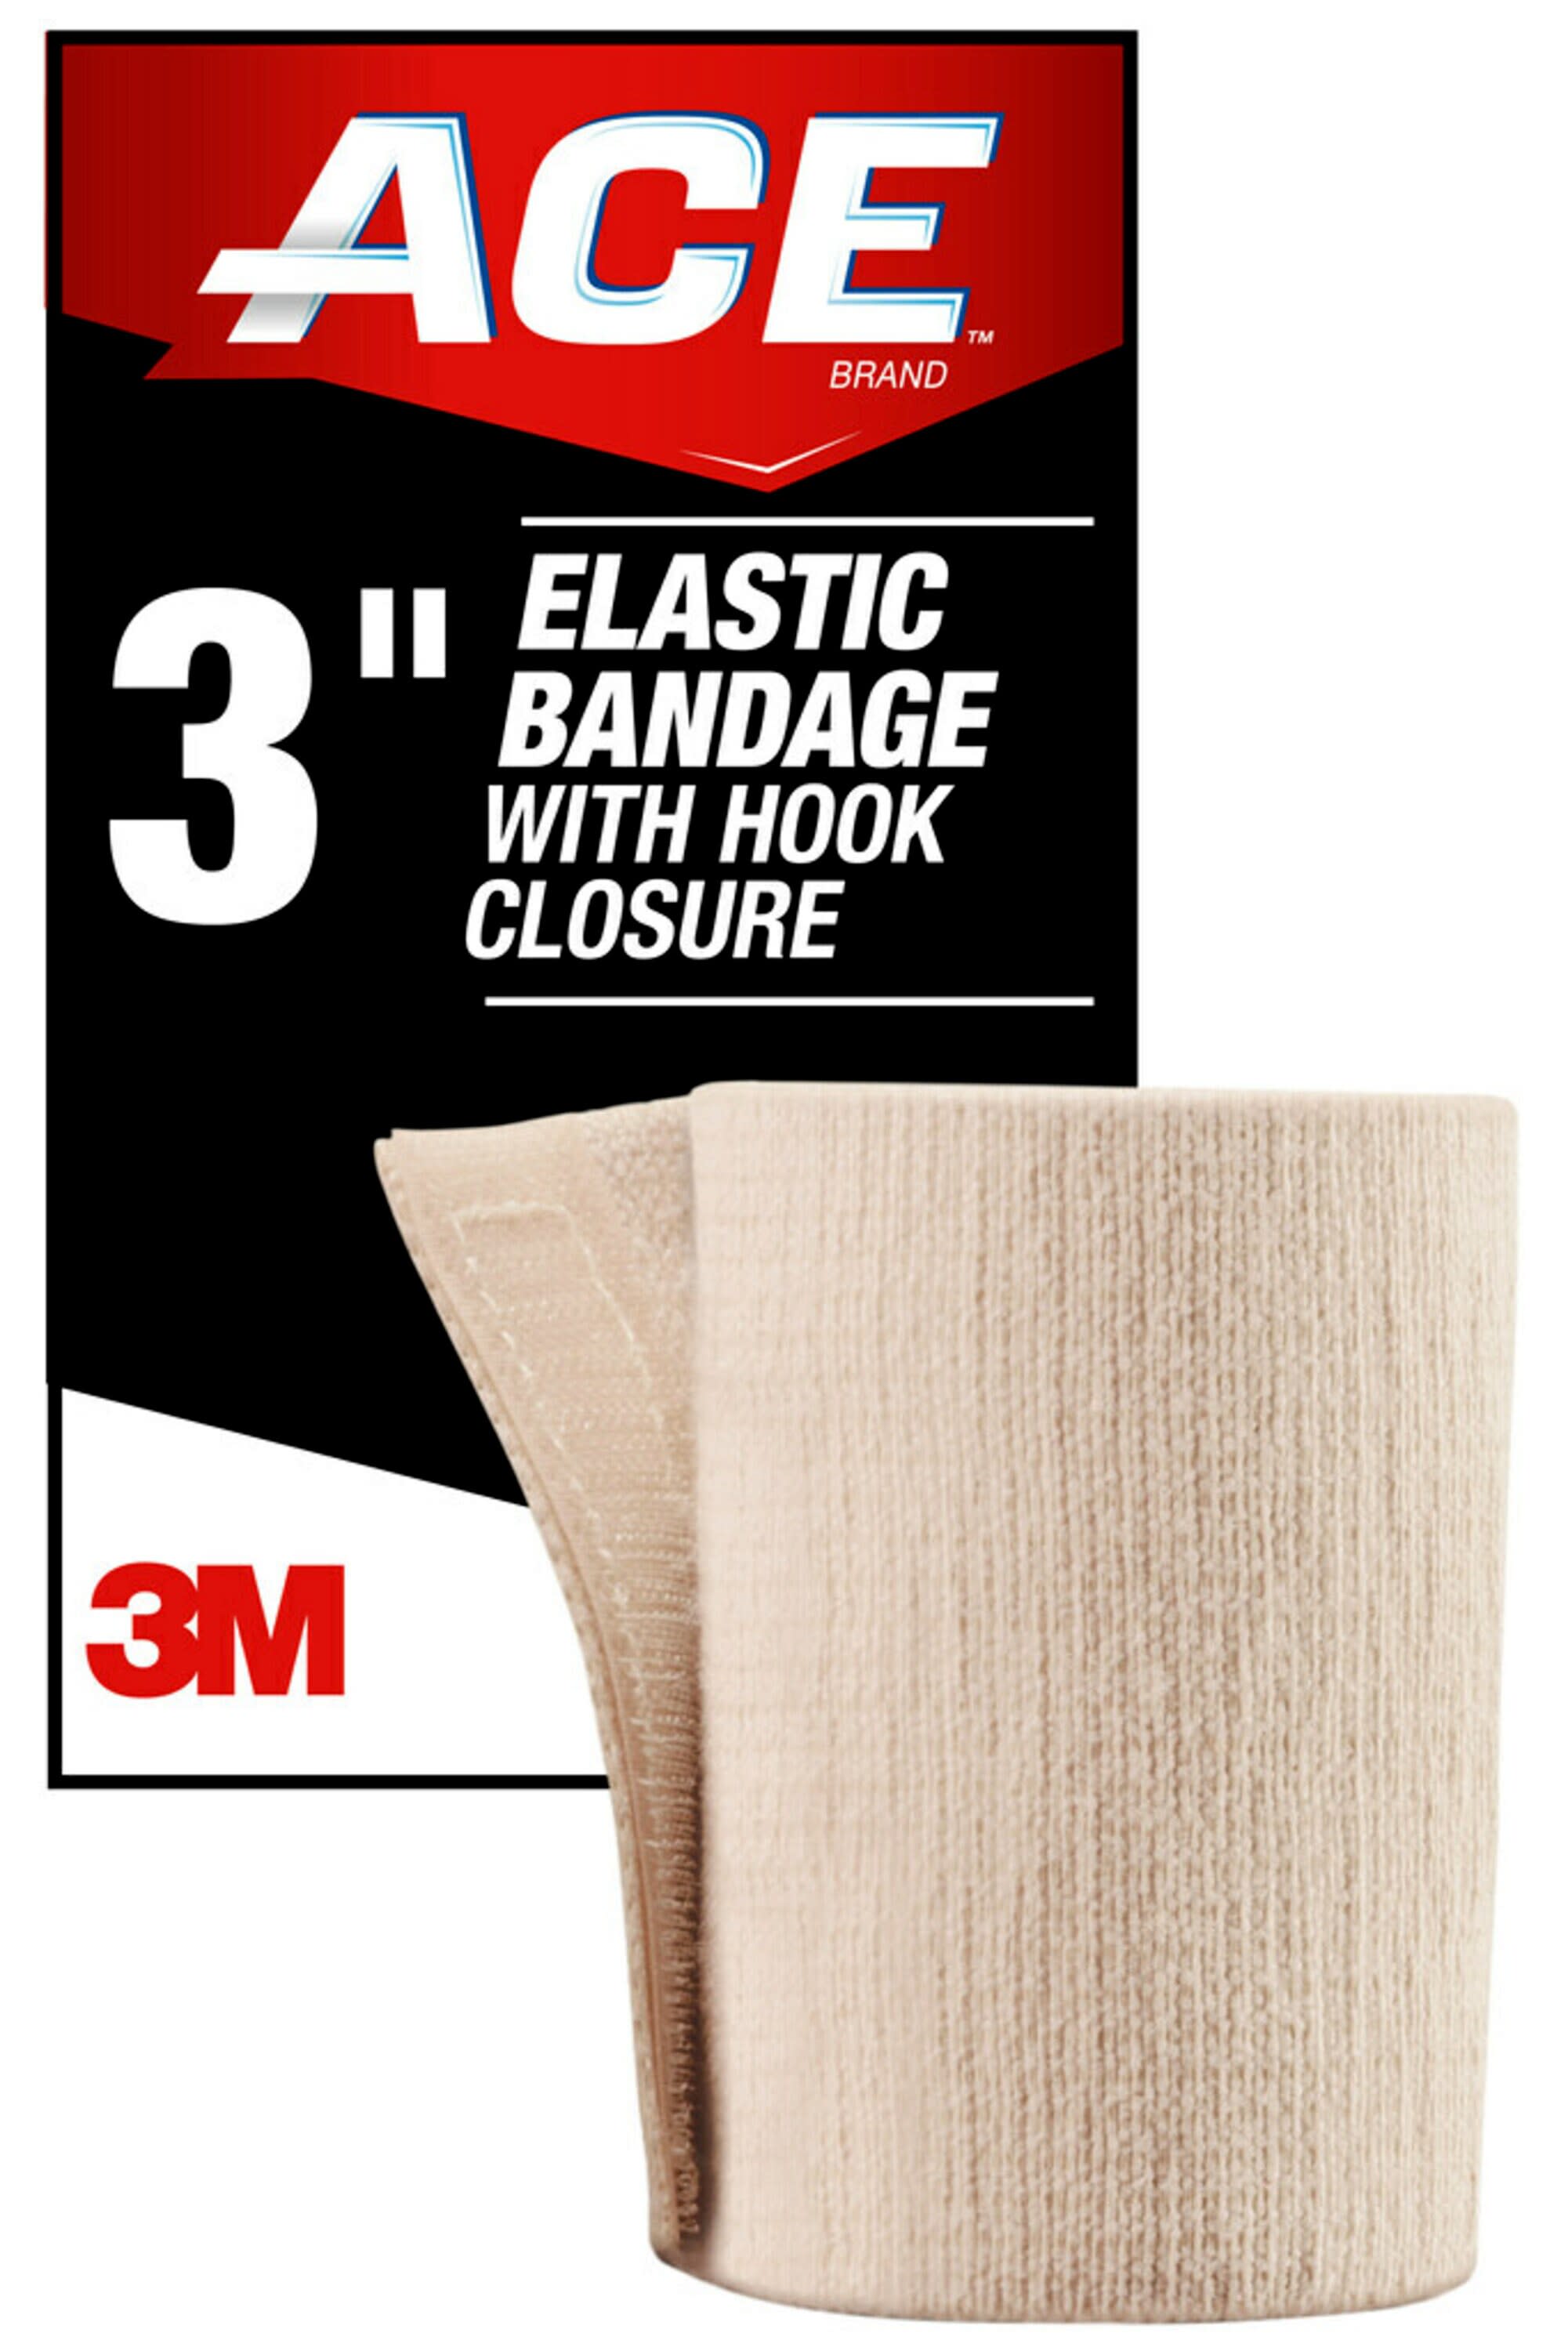 ACE™ Brand Elastic Bandage with Hook Closure – 3”, One Size Fits Most - image 3 of 13